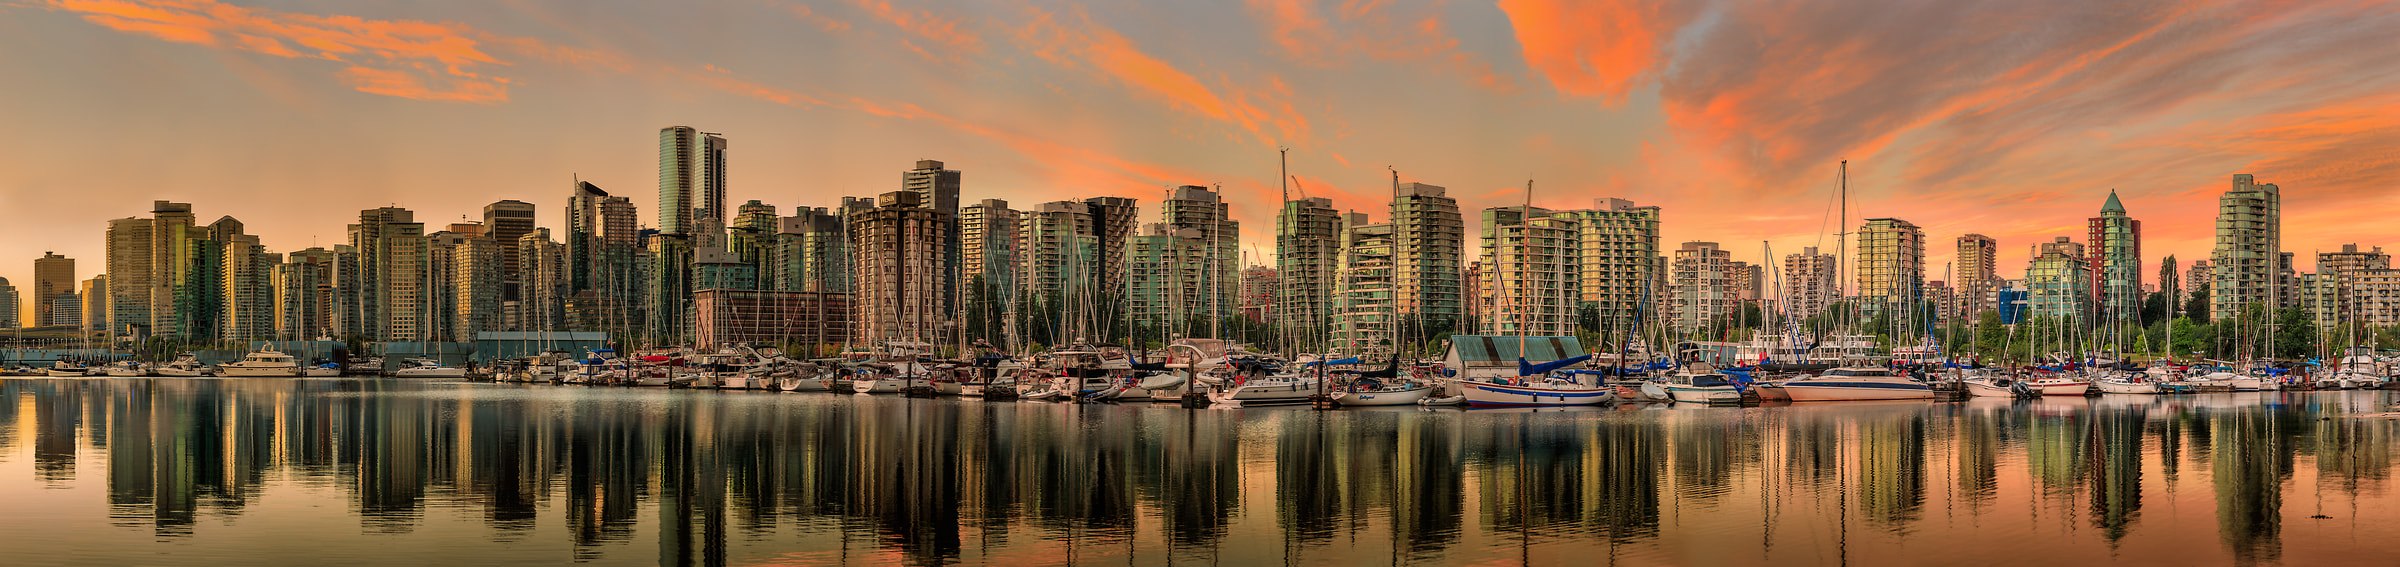 887 megapixels! A very high resolution, panorama VAST photo print of the Vancouver skyline at sunrise; photograph created by Scott Dimond in Coal Harbour, Vancouver, BC, Canada